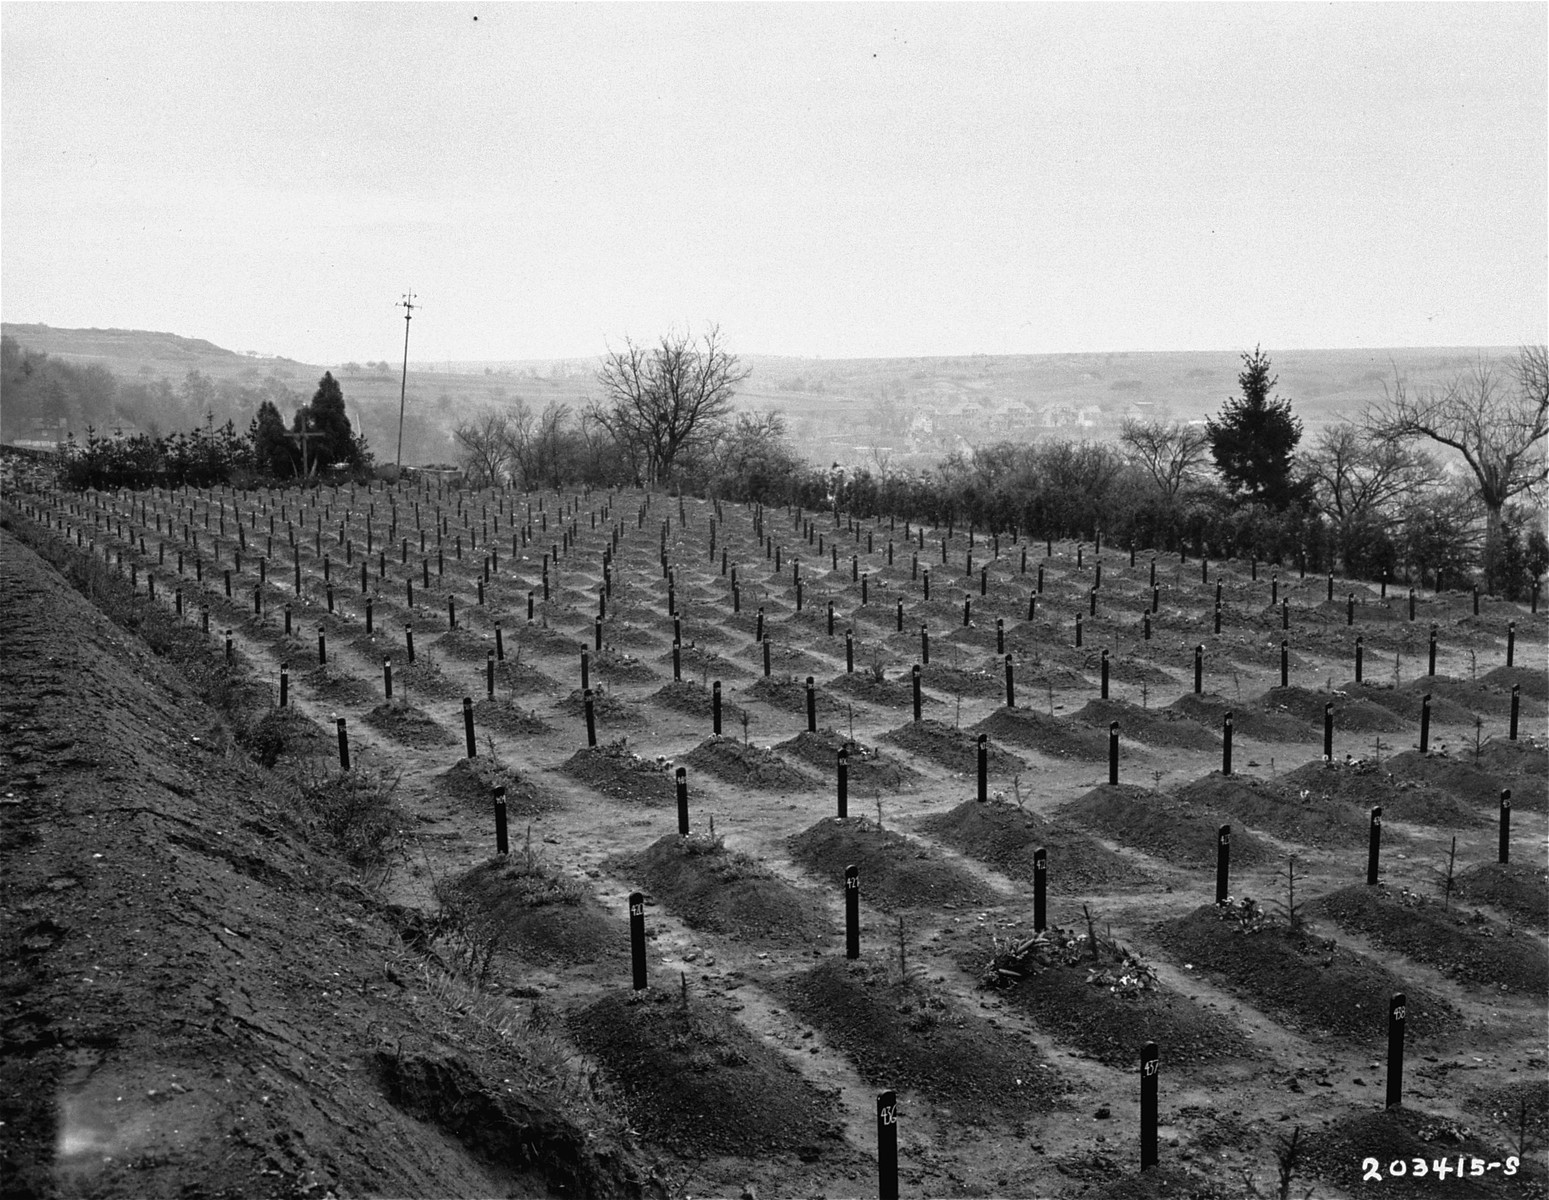 View of the cemetery at the Hadamar Institute, where victims of the Nazi euthanasia program were buried in mass graves.

The photograph was taken by an American military photographer soon after the liberation.